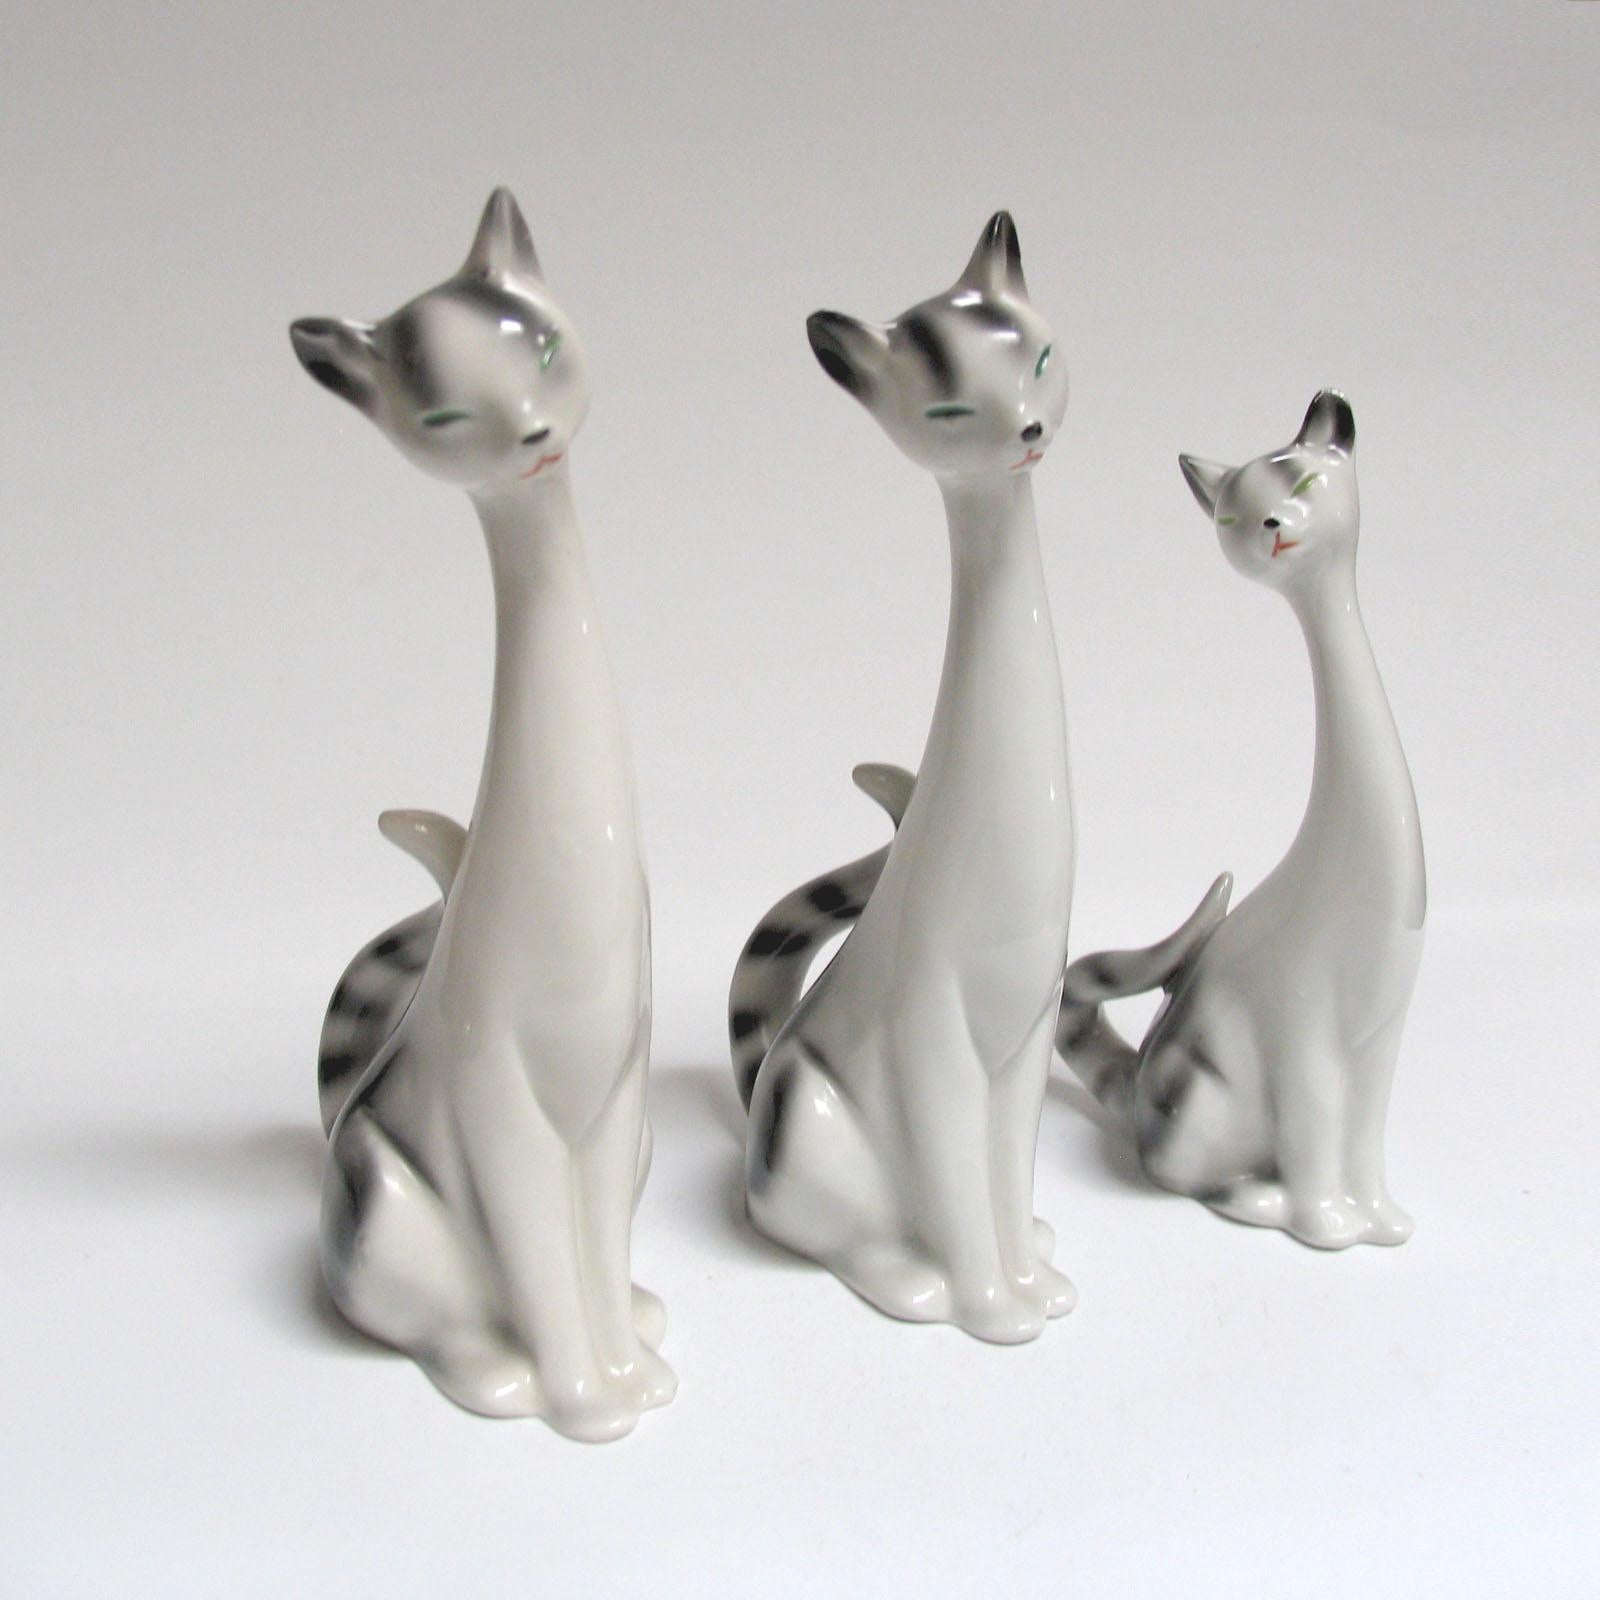 Mid-Century Modern decorative ceramic cats, Sweden, 1970s.
Three ceramic cats, long necks, very cute and decorative, a perfect gift for the cat lovers. In very good used condition, no damages, some minimal wear. All marked under the bottom.
 